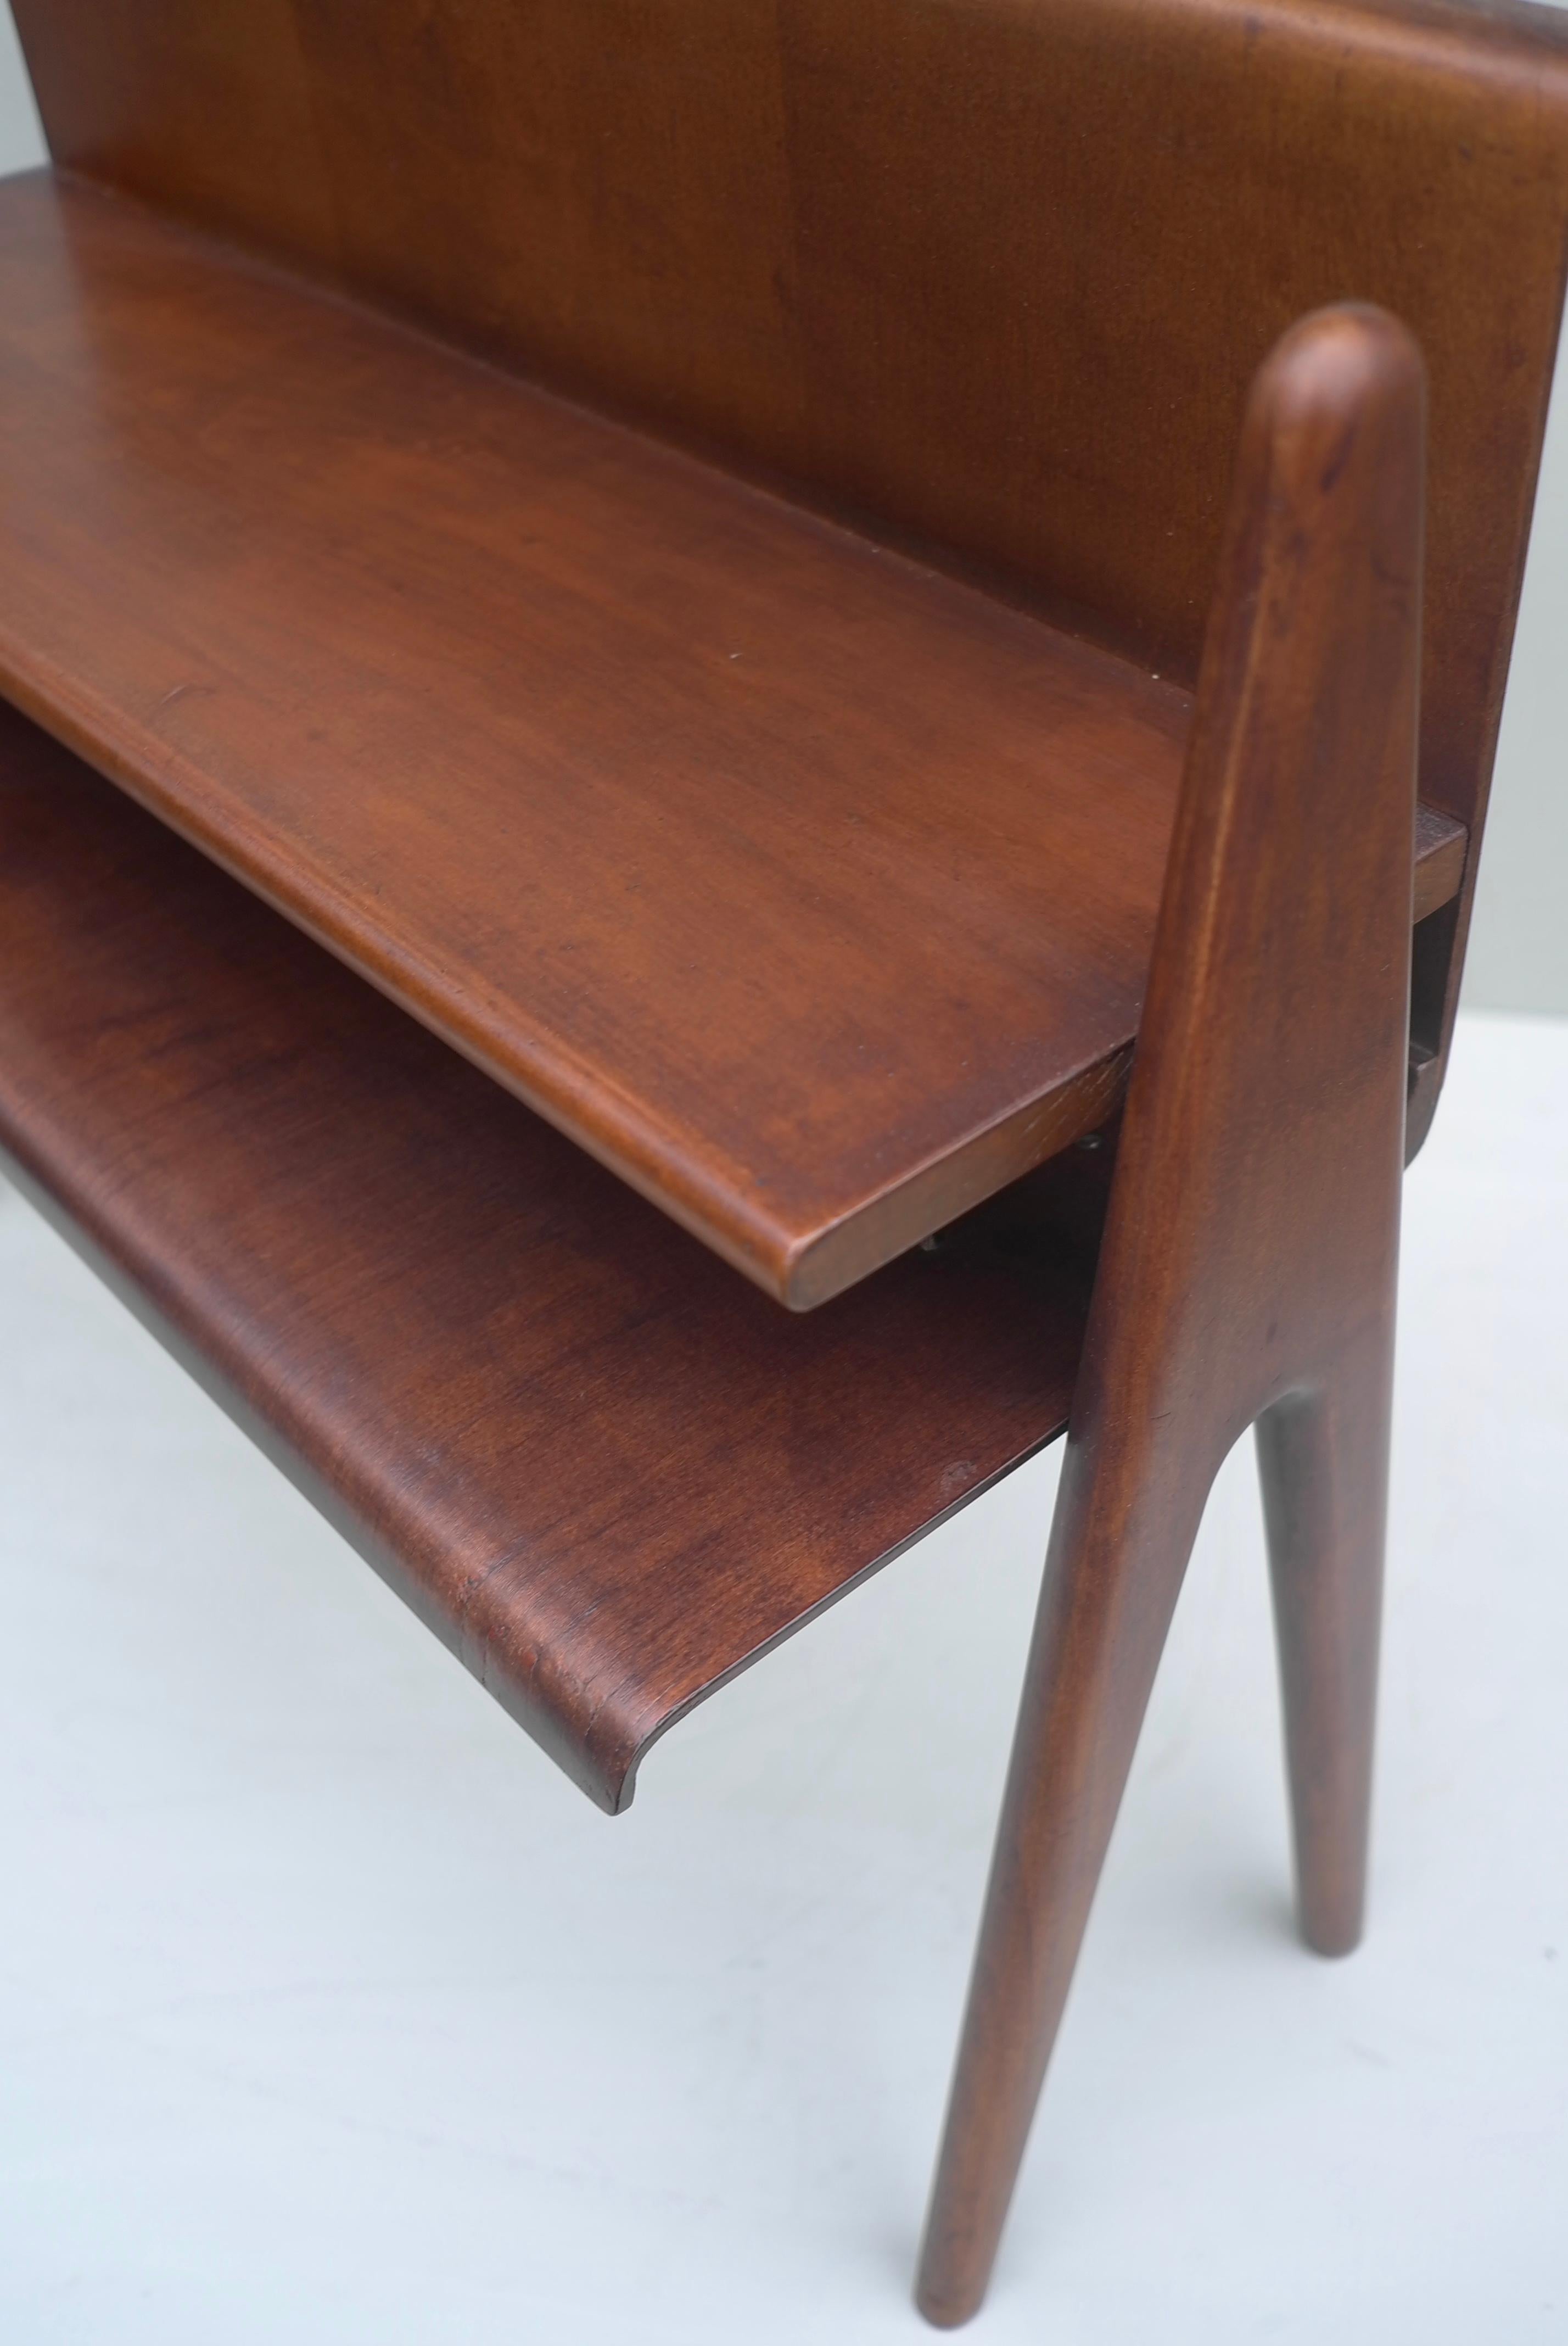 Cesare Lacca Curved Walnut Plywood Side Table or Book Stand, Italy, 1950s For Sale 3